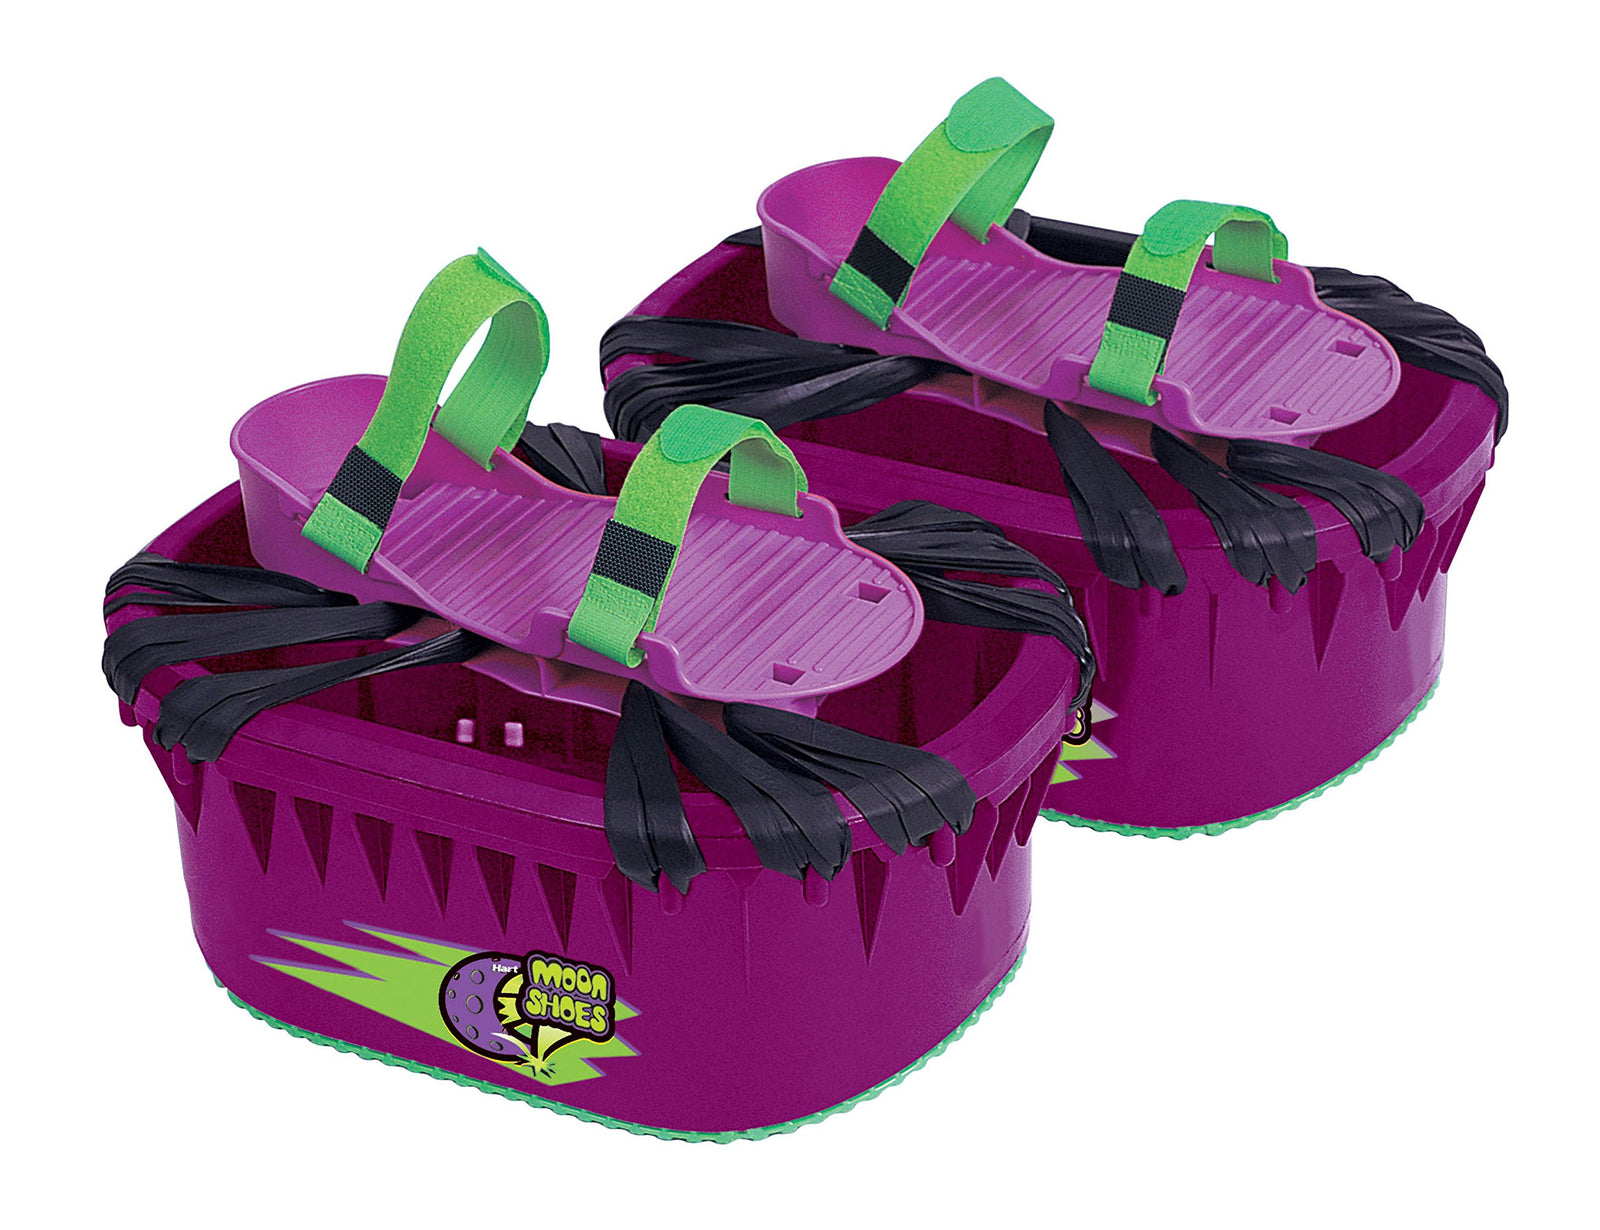 Big Time Toys Moon Shoes Bouncy Shoes, Mini Trampolines For your Feet, One Size, Black, New and improved, Bounce your way to fun, Very durable, No tool assembly, Athletic development, up to 160 lbs